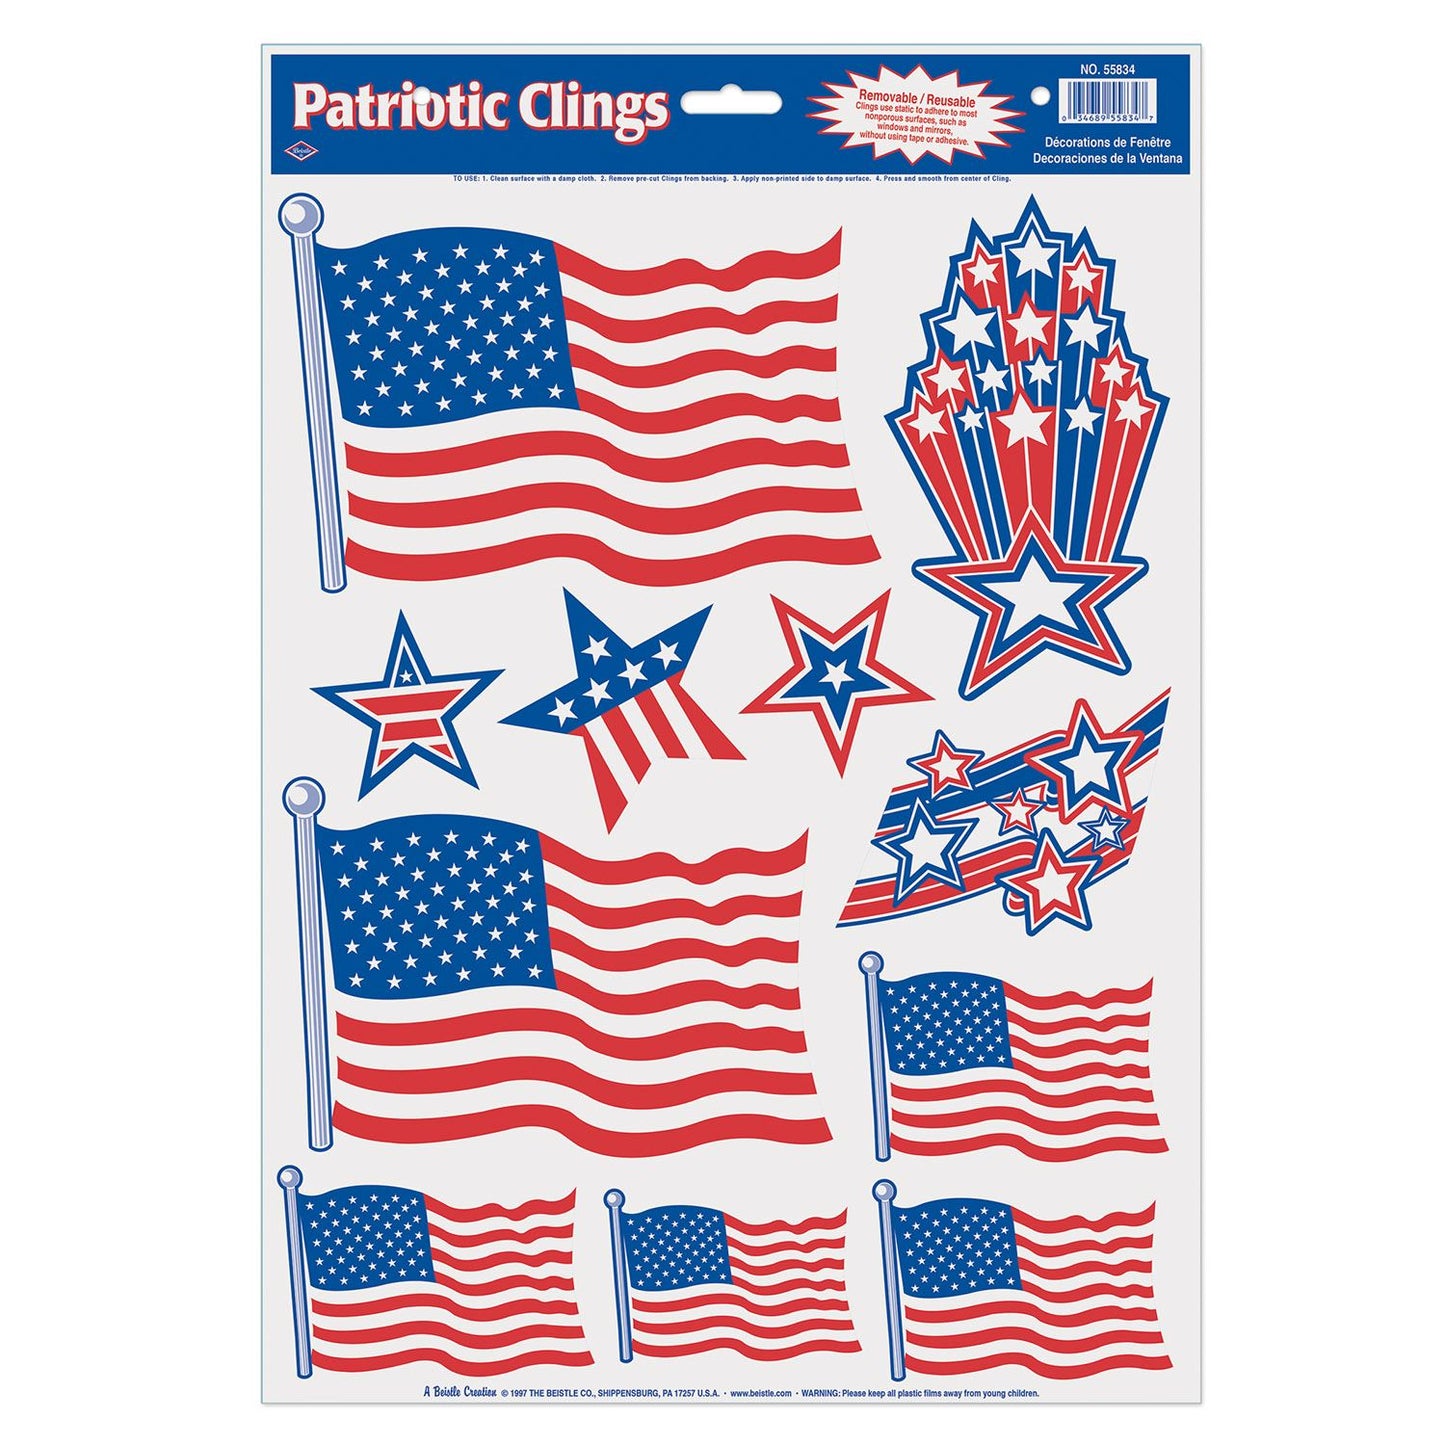 Beistle Patriotic Window Clings - Party Supply Decoration for Patriotic